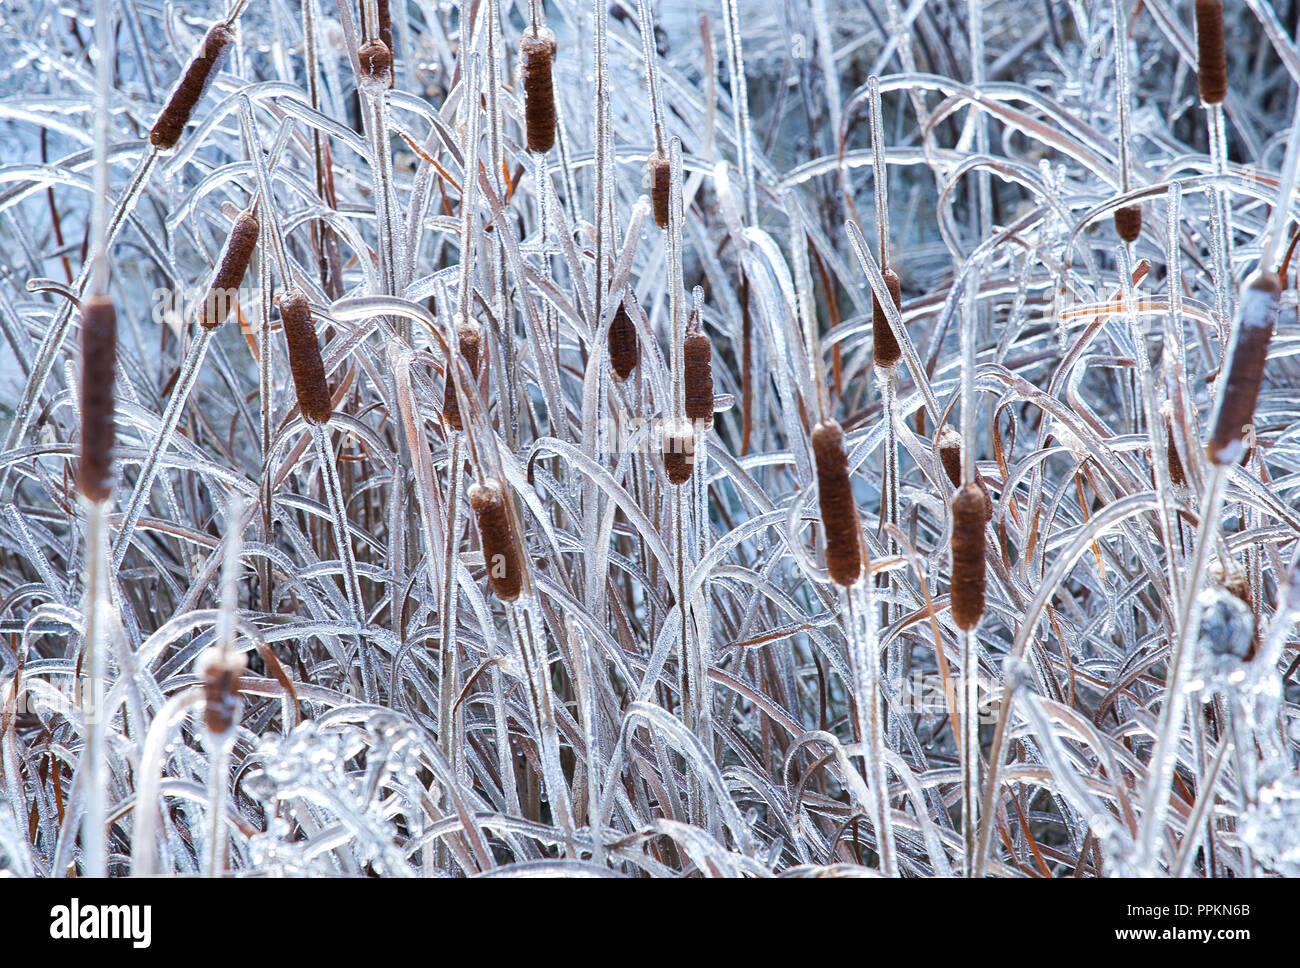 Laval,Canada 11,December,2012.Ice covered Typha plants in a field.Credit:Mario Beauregard/Alamy Live News Stock Photo